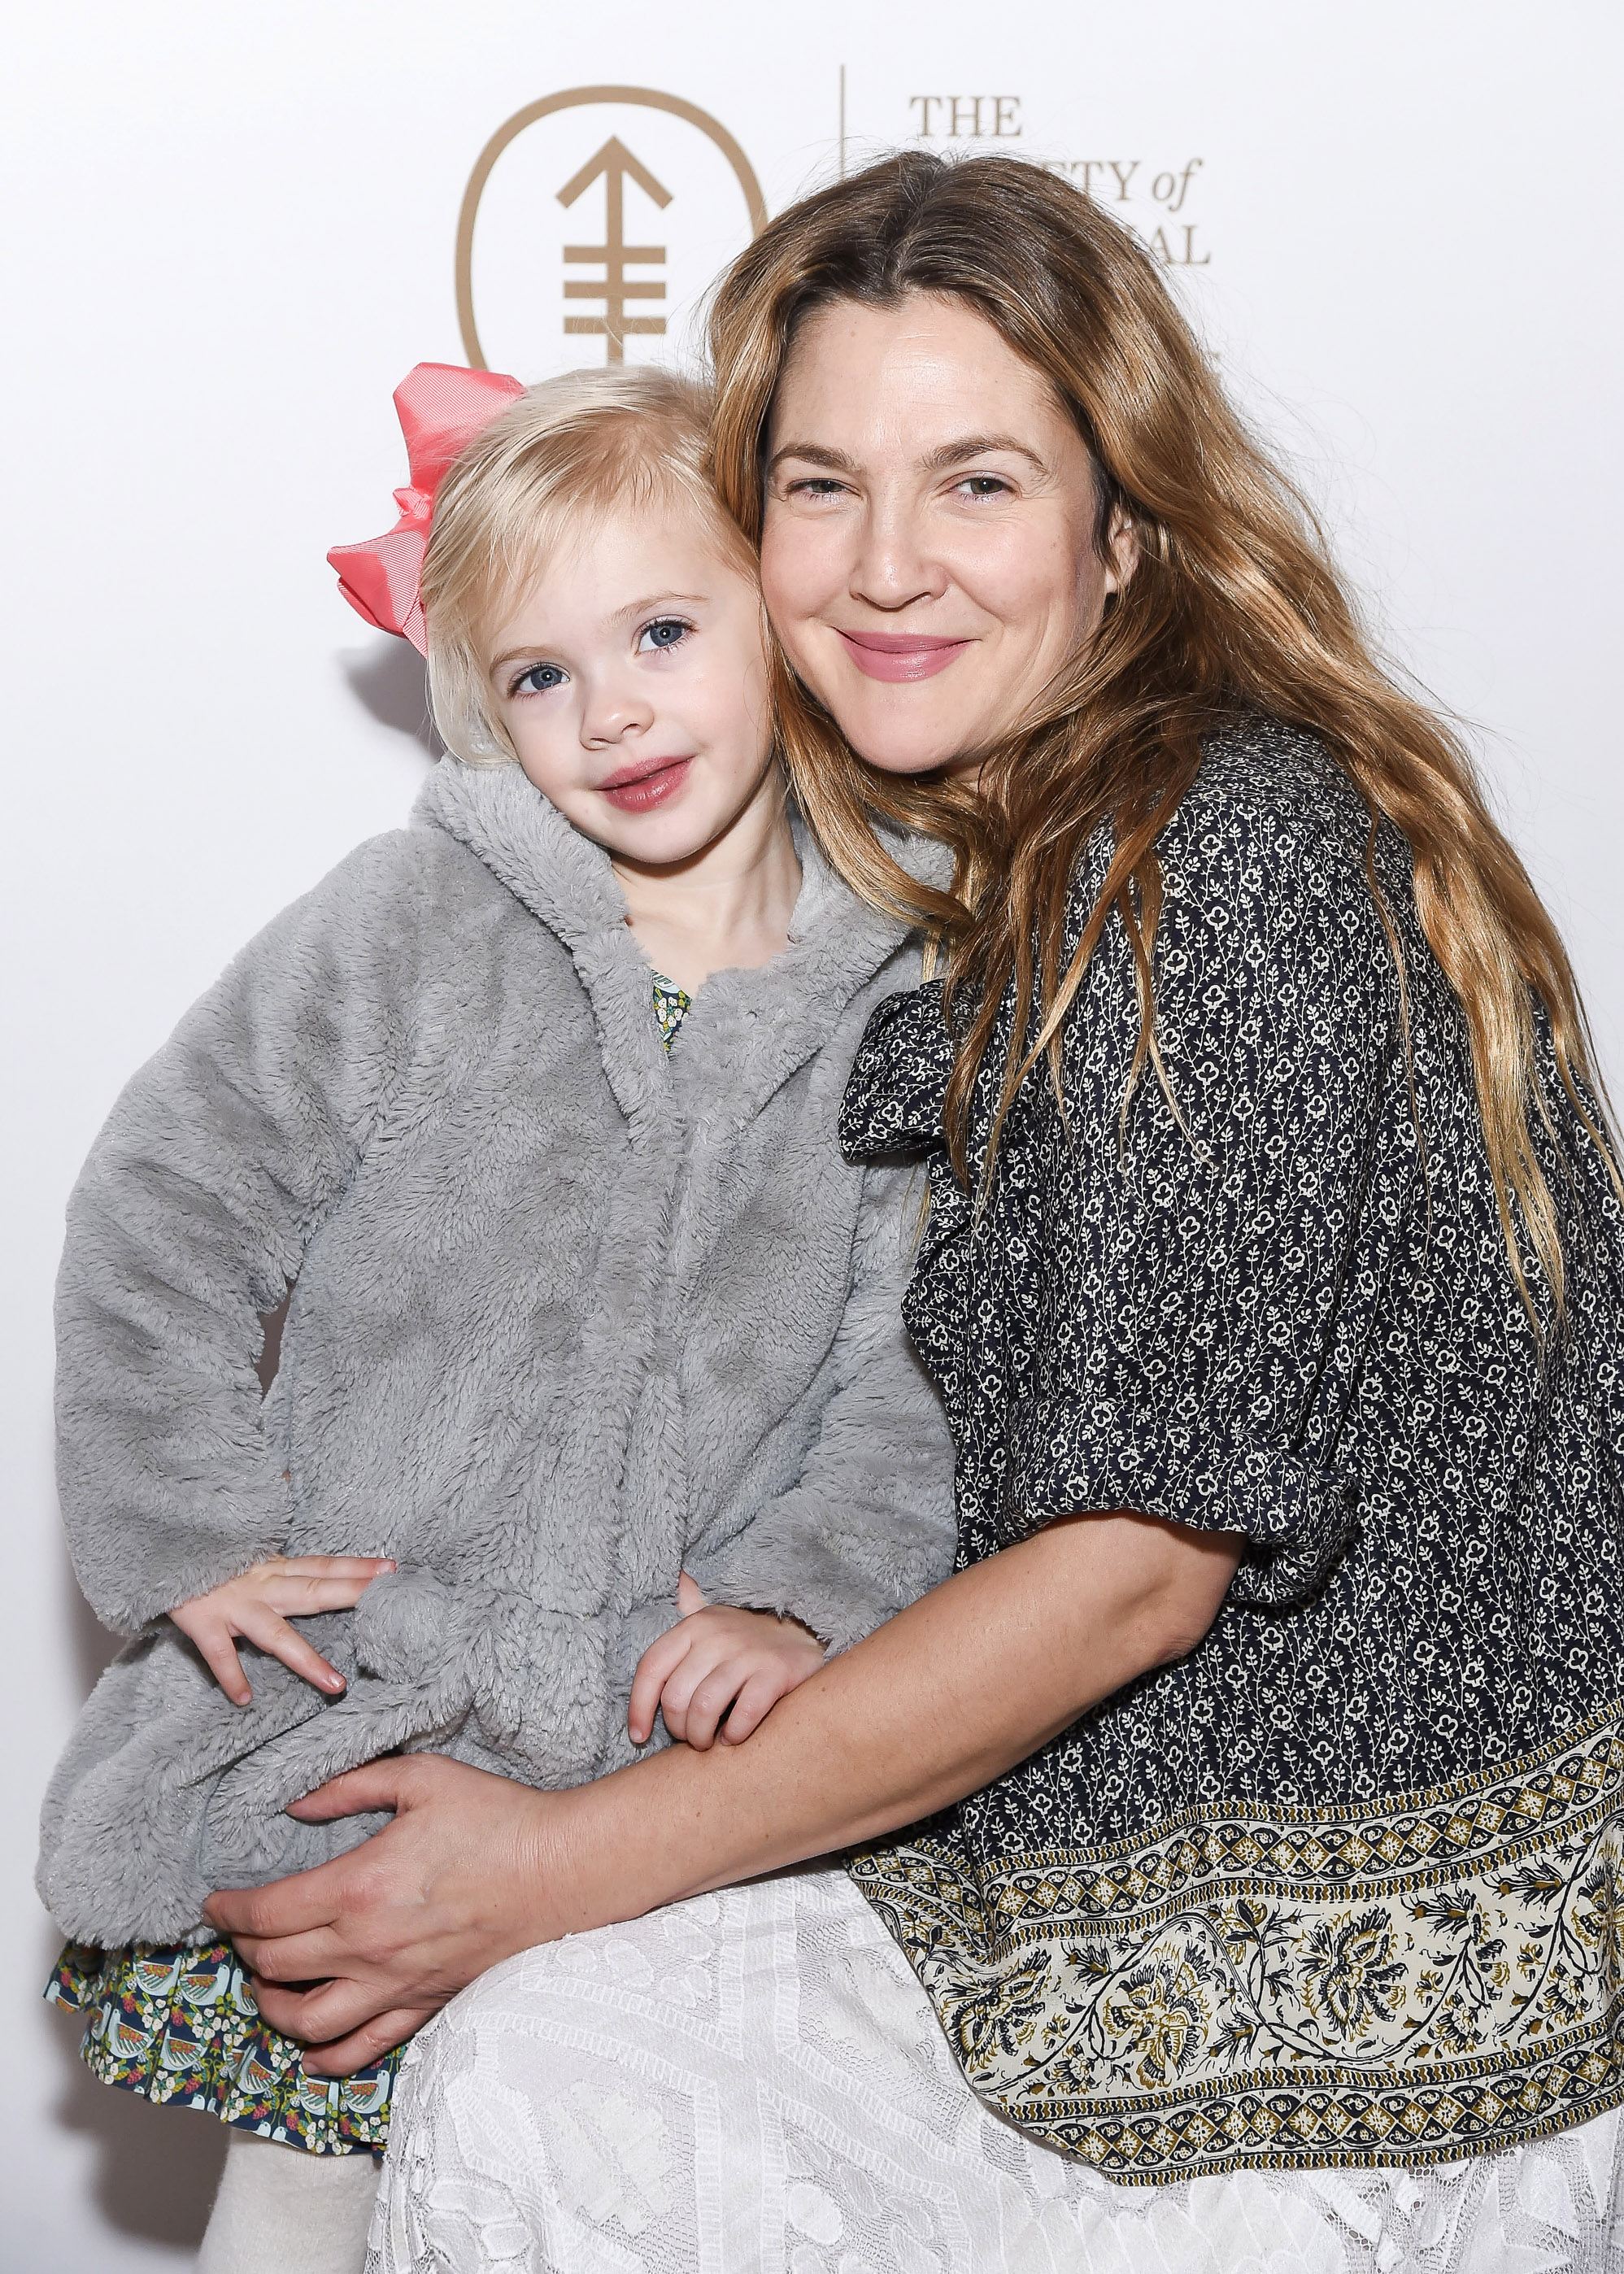 Frankie Barrymore Kopelman and actress Drew Barrymore on March 7, 2017 in New York City. | Source: Getty Images